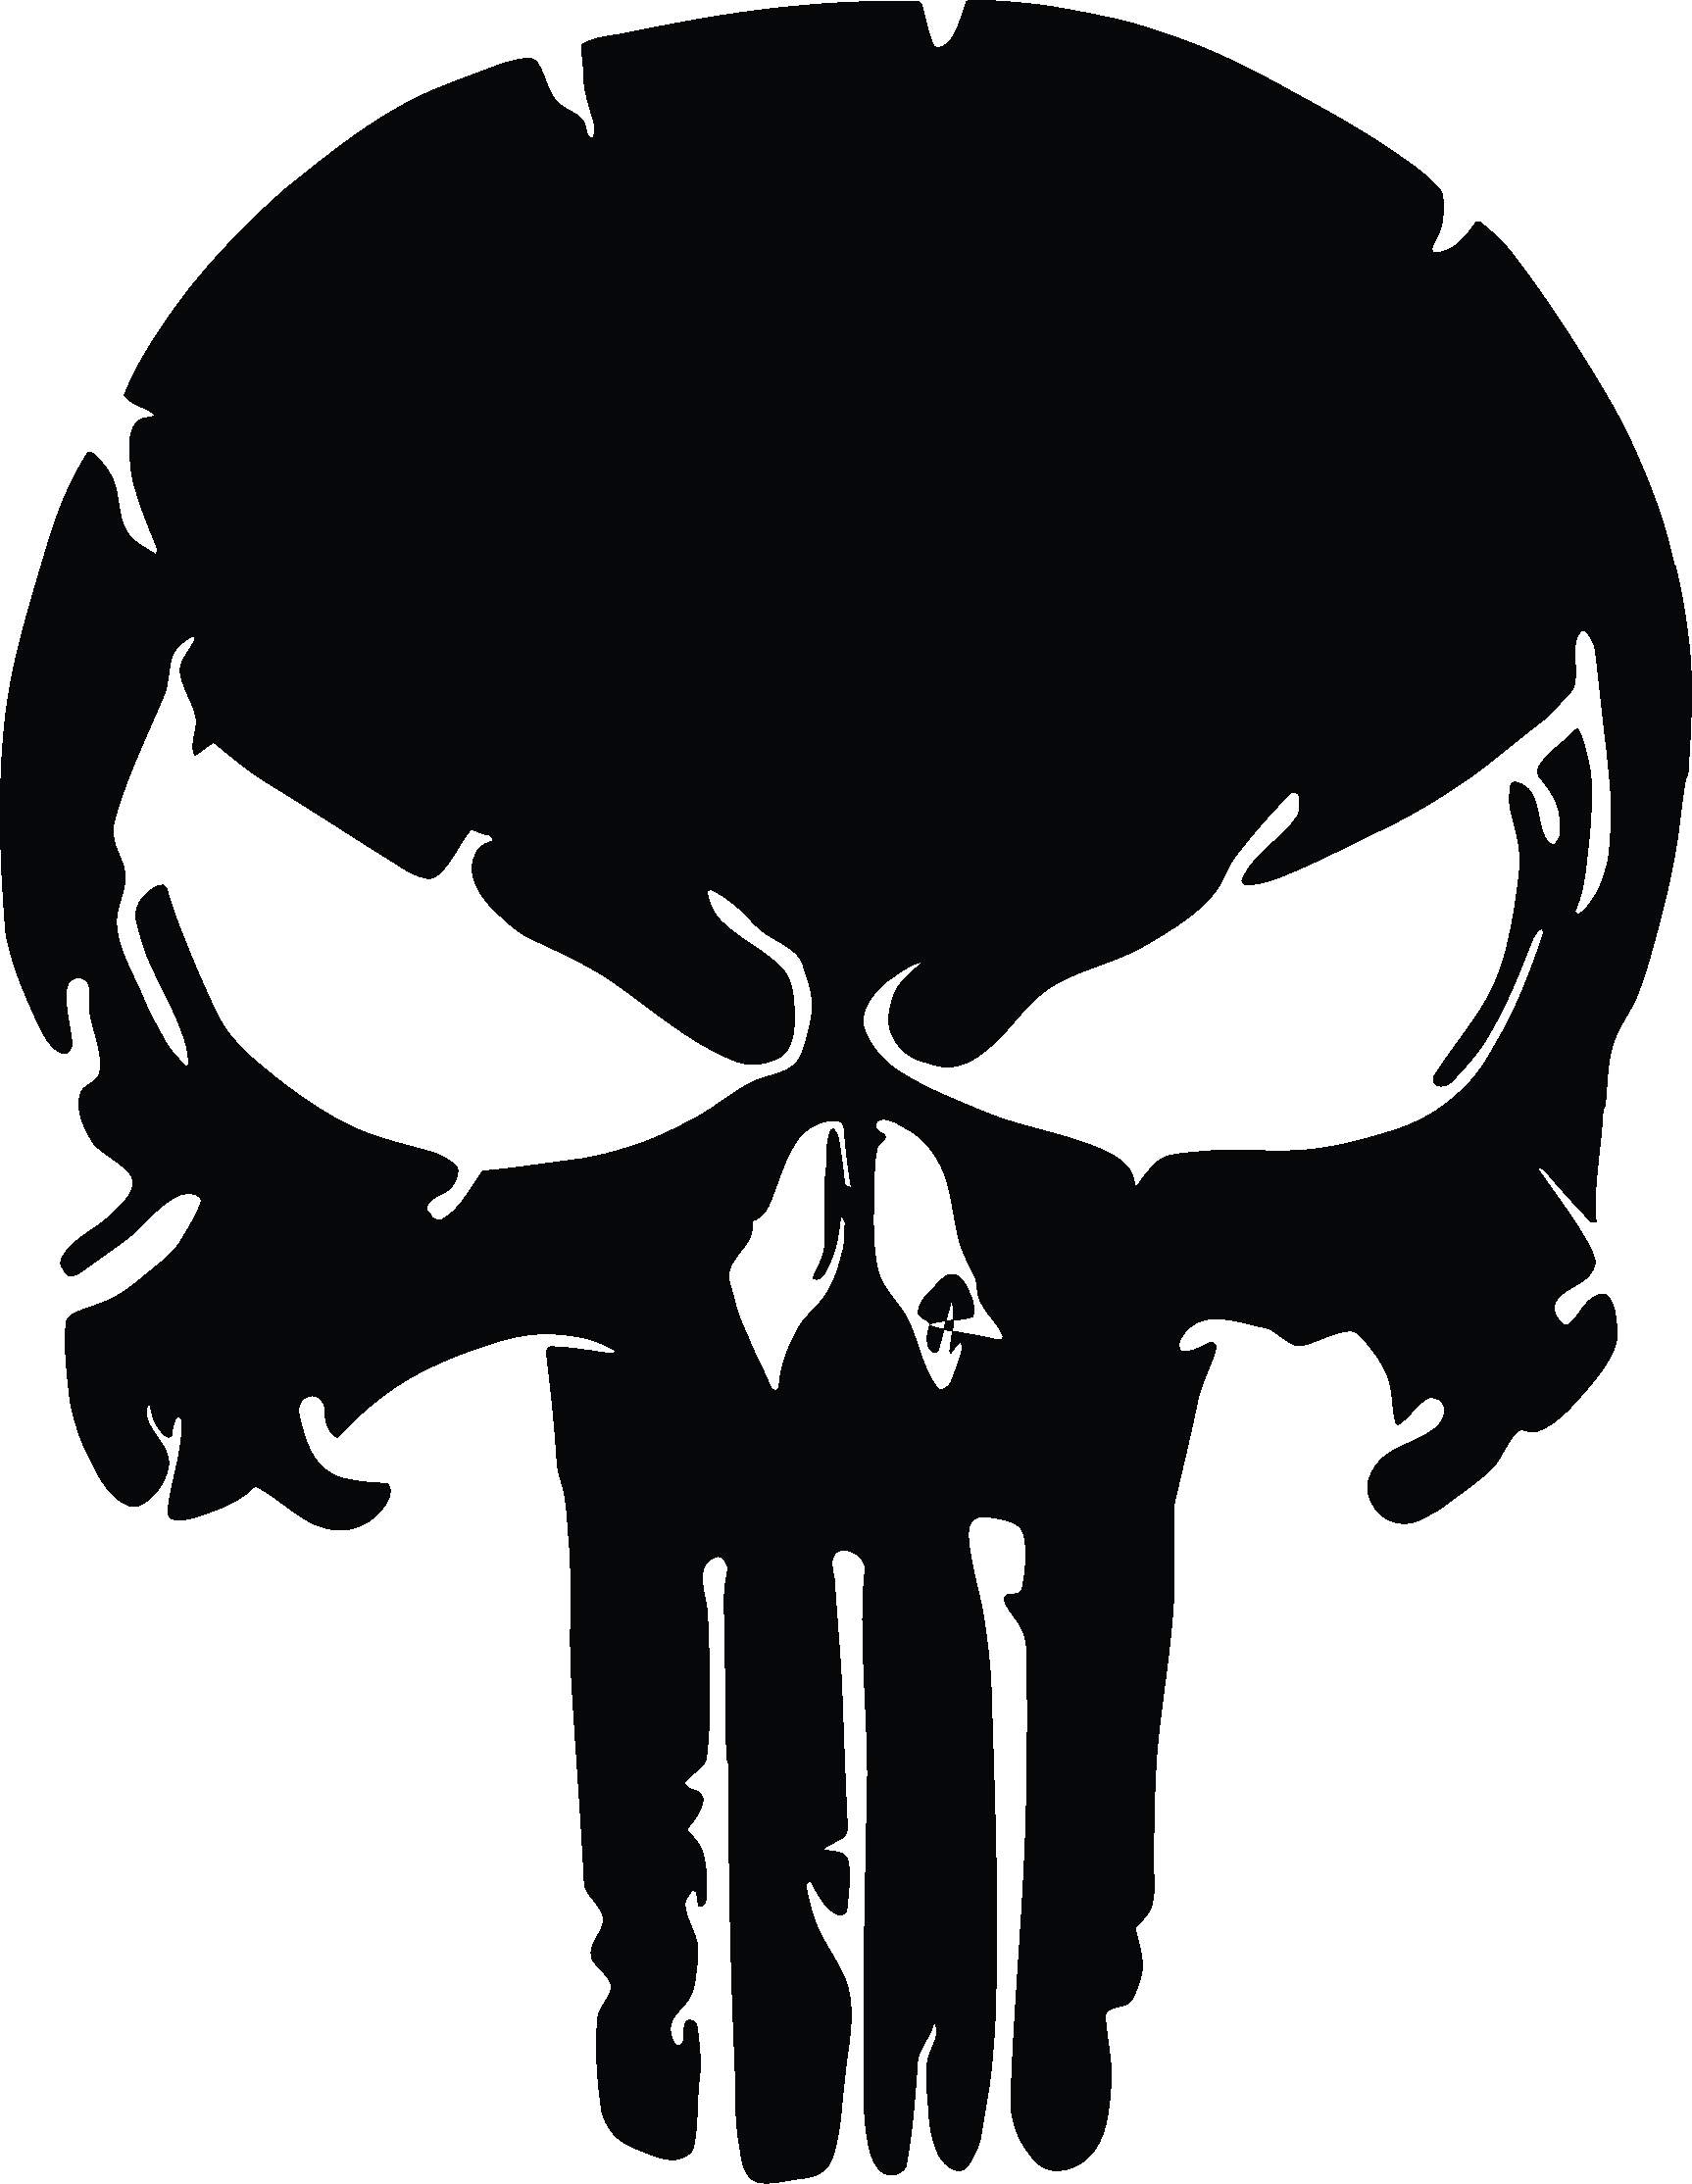 Download The Punisher Skull Distressed Vinyl Graphic Decal Punisher